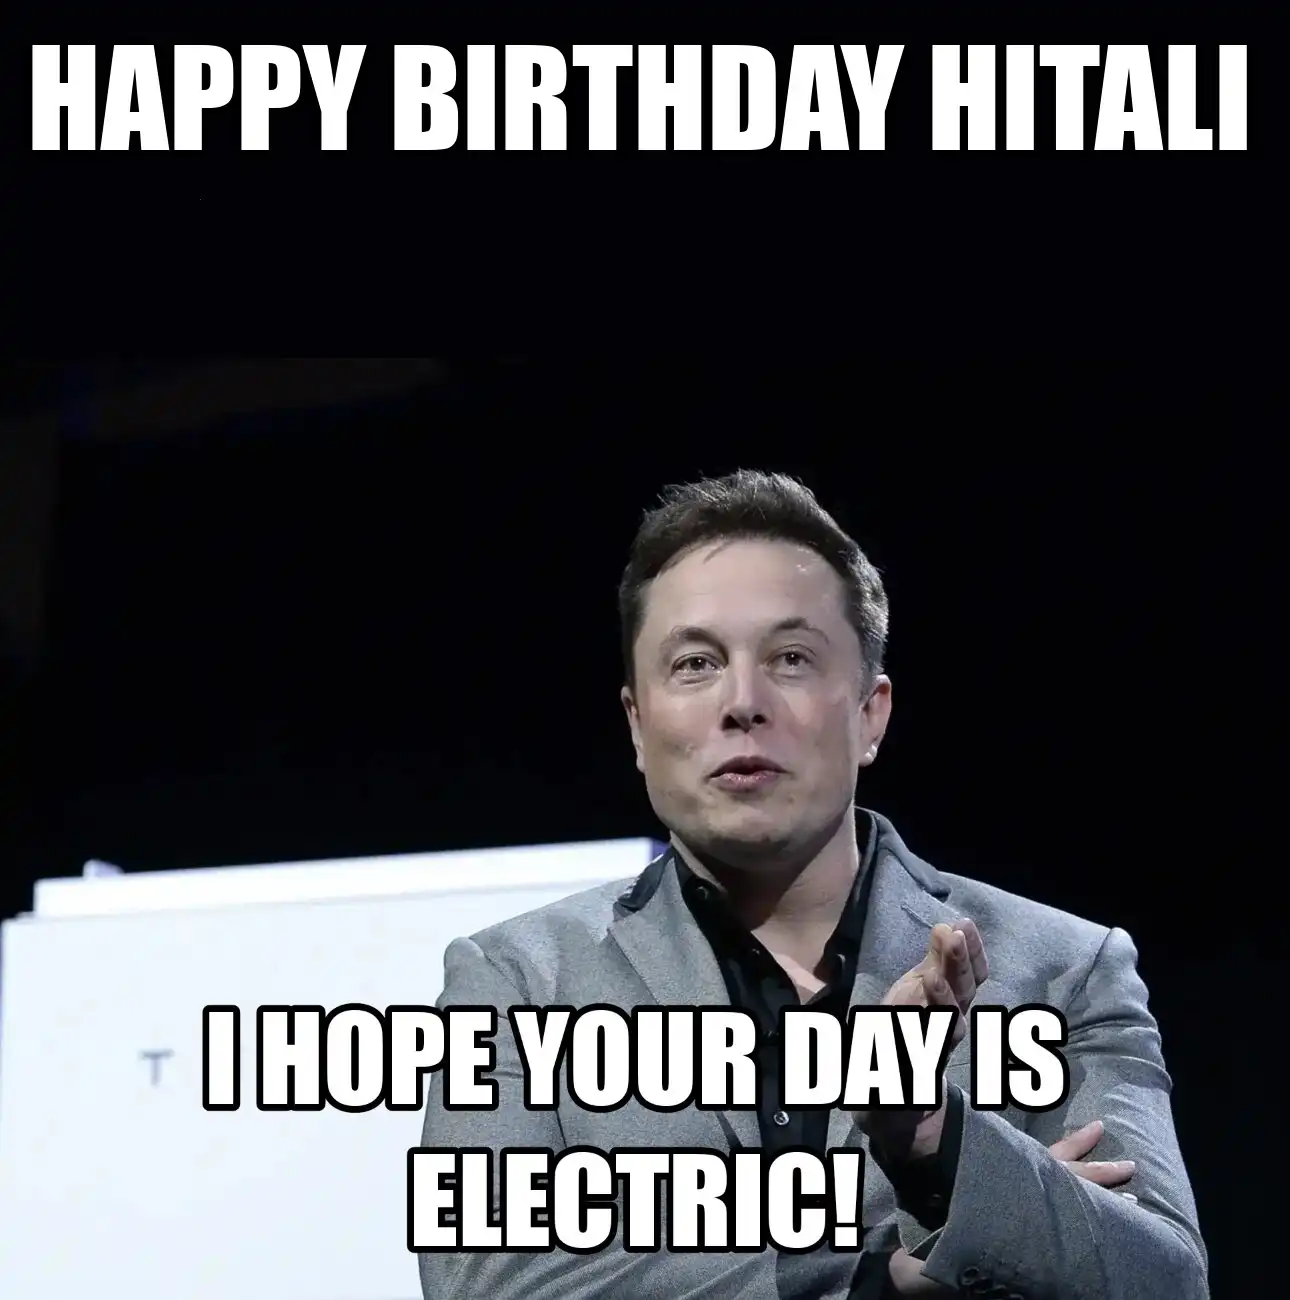 Happy Birthday Hitali I Hope Your Day Is Electric Meme